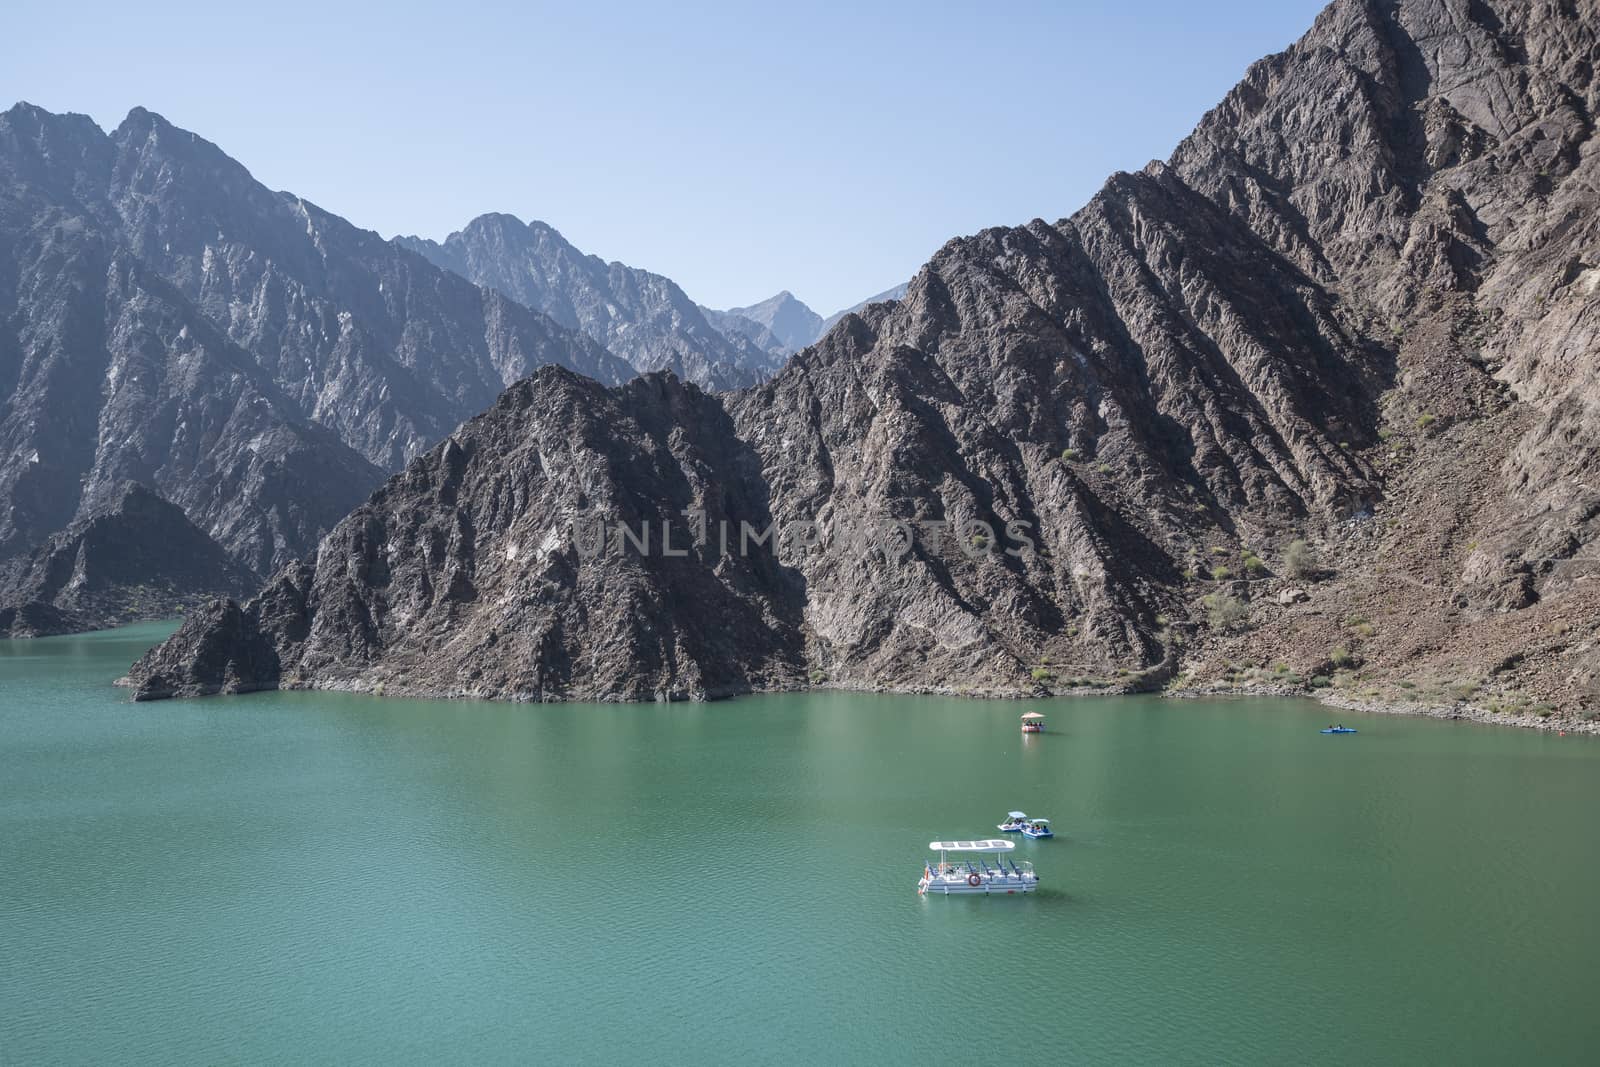 Hatta is the inland exclave of the emirate of Dubai in the UAE where people can enjoy kayaking and boating on the lake of Hatta Dam. United Arab Emirates